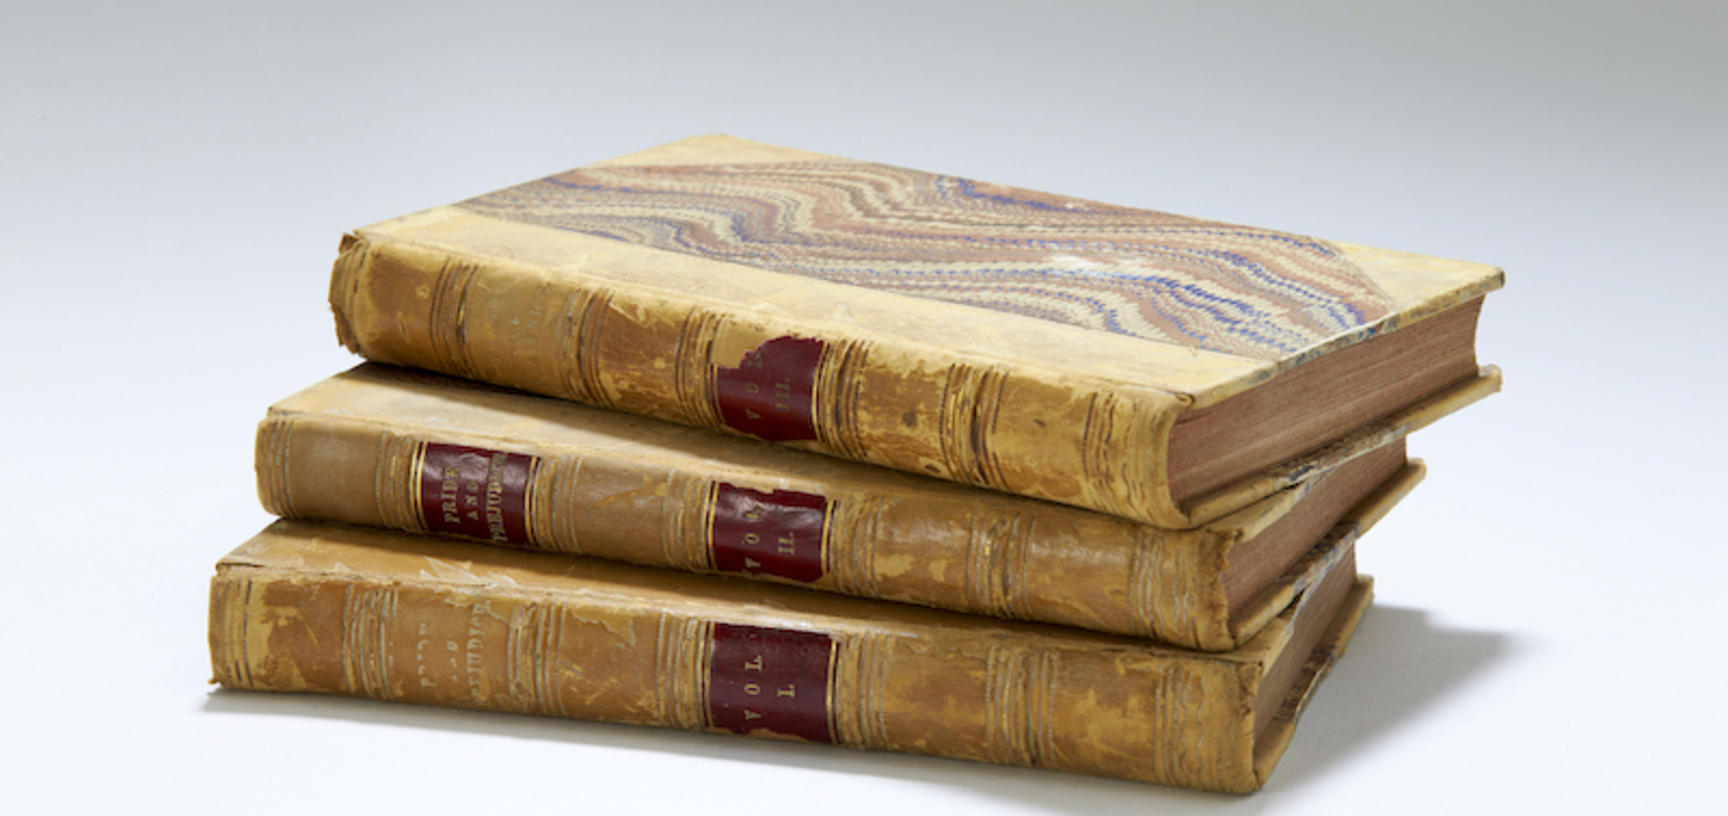 Three books in a stack with old binding